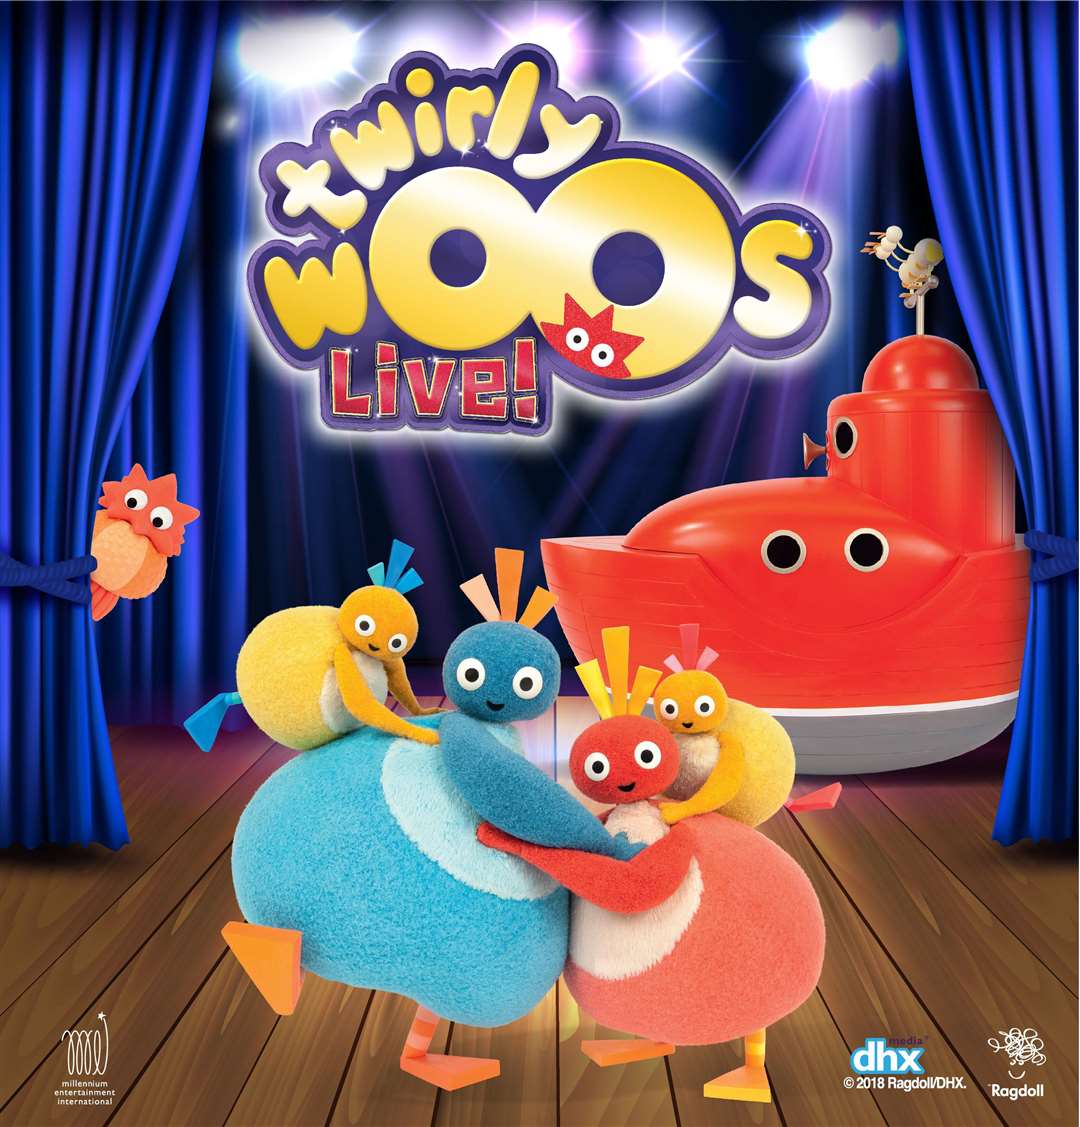 Twirlywoos are coming to Chatham!